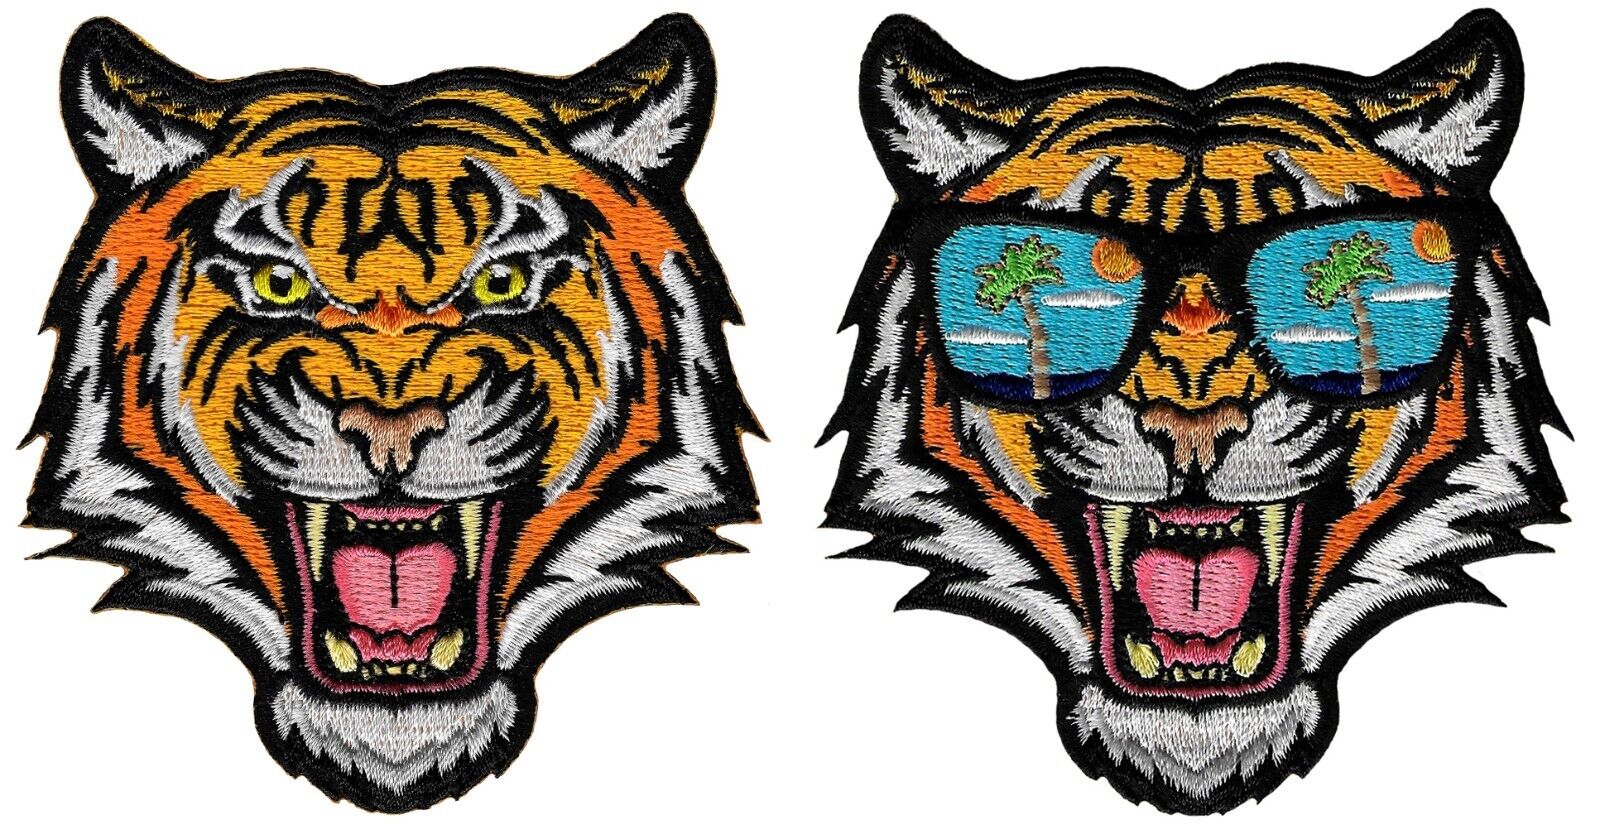 LOT of TWO - BENGAL TIGER iron-on PATCH embroidered ANIMAL SOUVENIR APPLIQUE new